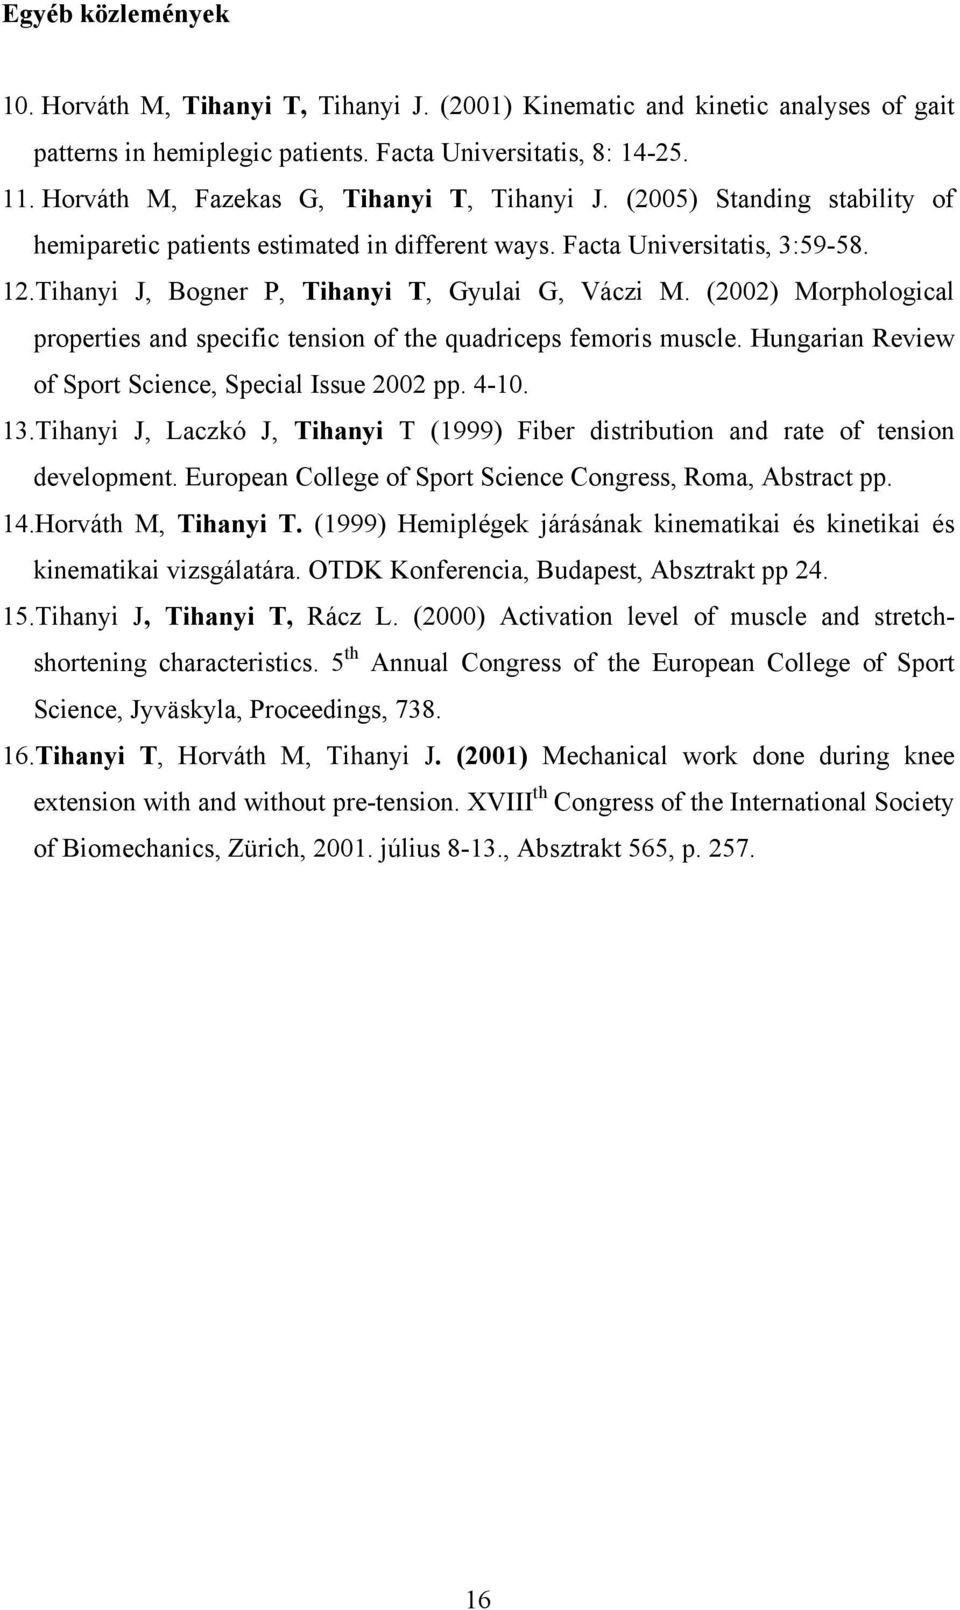 Tihanyi J, Bogner P, Tihanyi T, Gyulai G, Váczi M. (2002) Morphological properties and specific tension of the quadriceps femoris muscle. Hungarian Review of Sport Science, Special Issue 2002 pp.